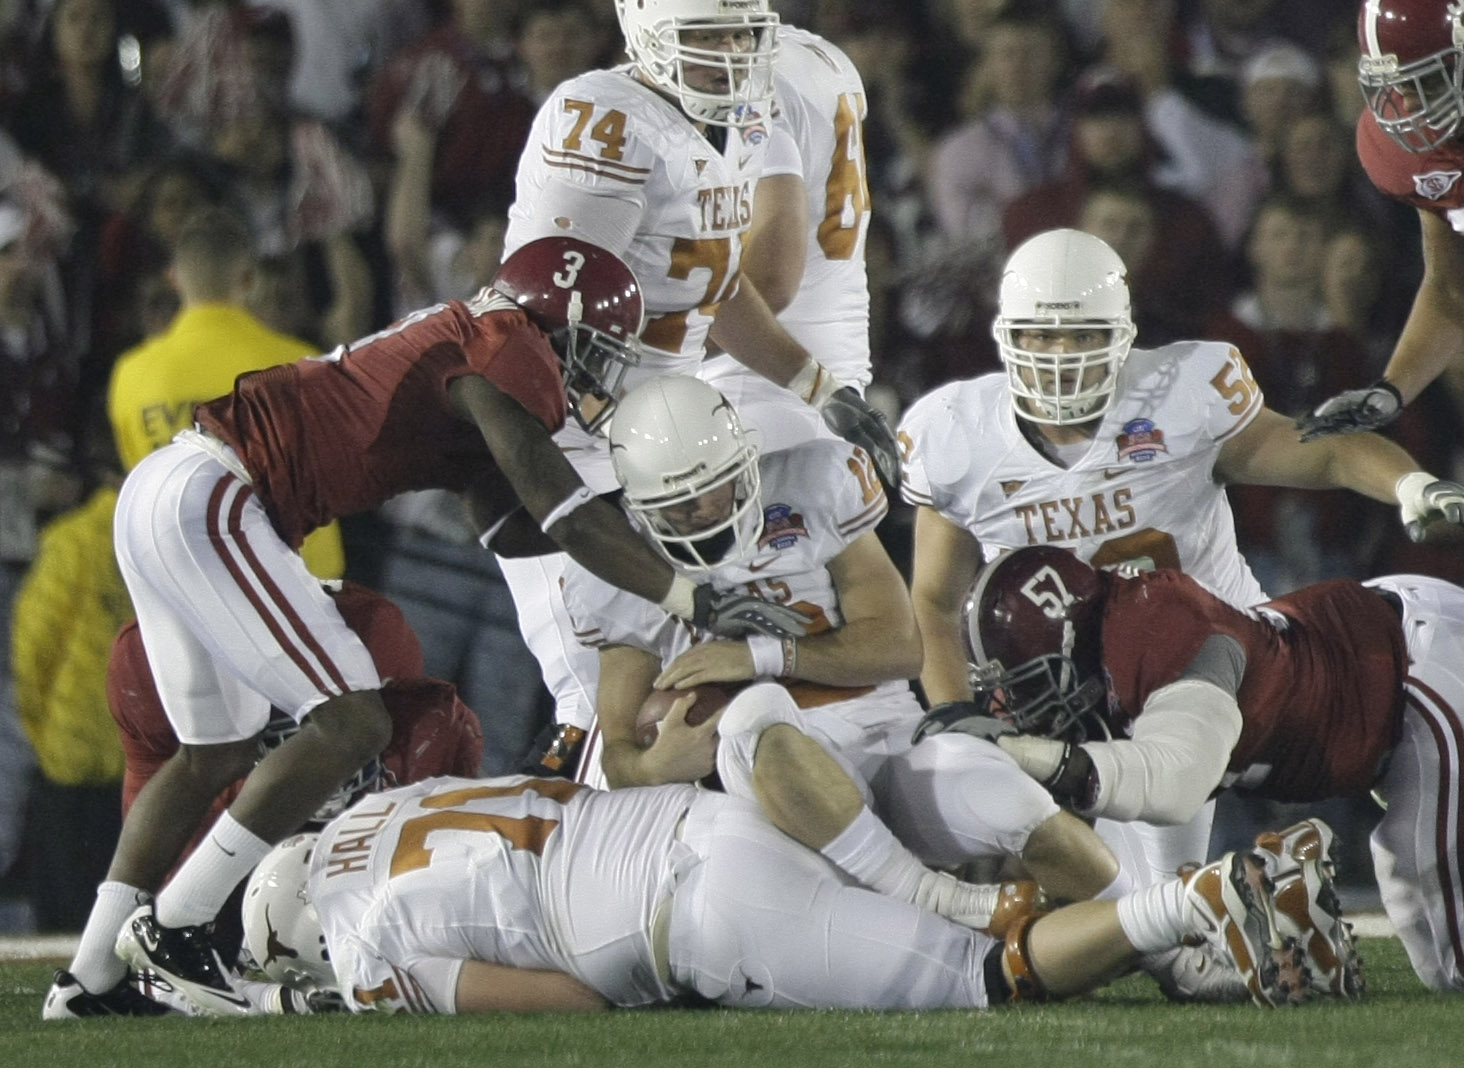 Photo: Texas quarterback Colt McCoy is tackled by Alabama Marcell Dareus  during BCS Championship game the Rose Bowl in Pasadena, California -  LAP20100107404 